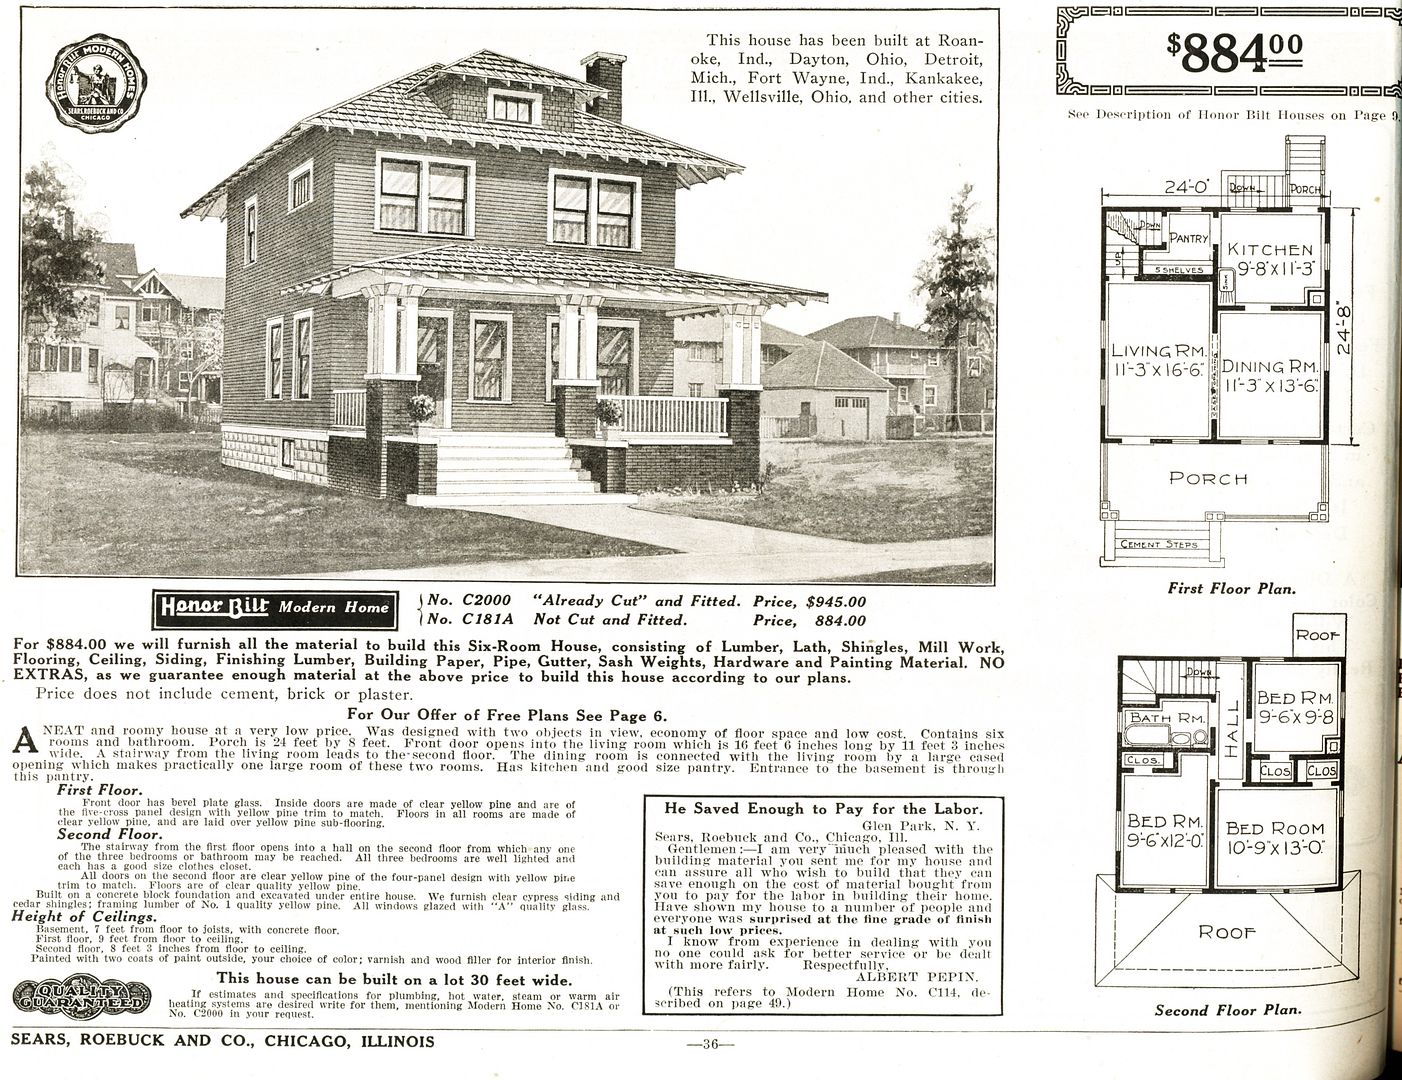 Featured in the above photos are several sytles of Sear Homes, including the Sears Gladstone